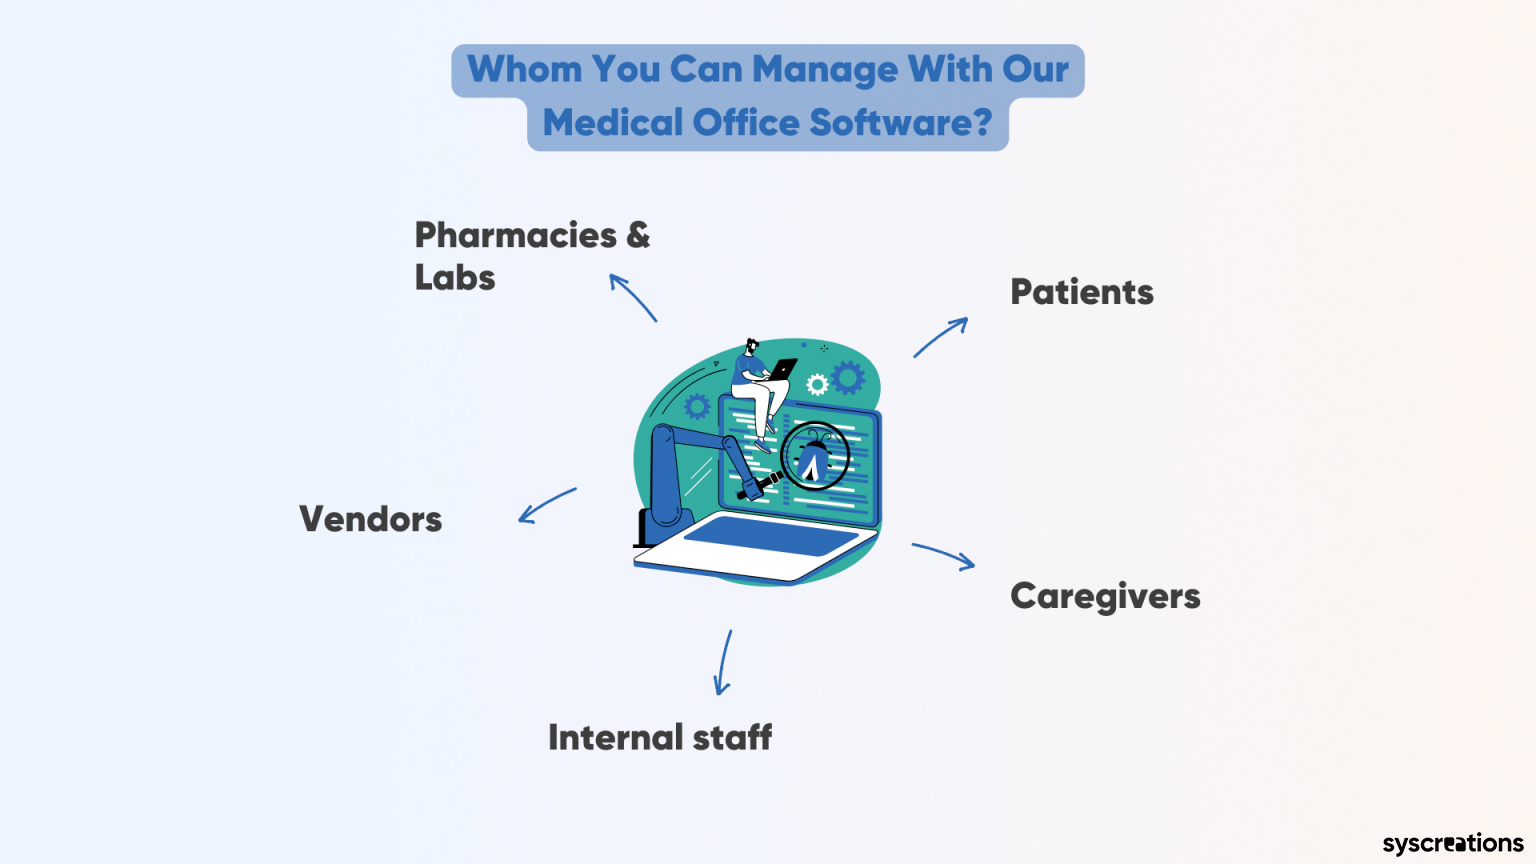 Manage patients and internal and external teams